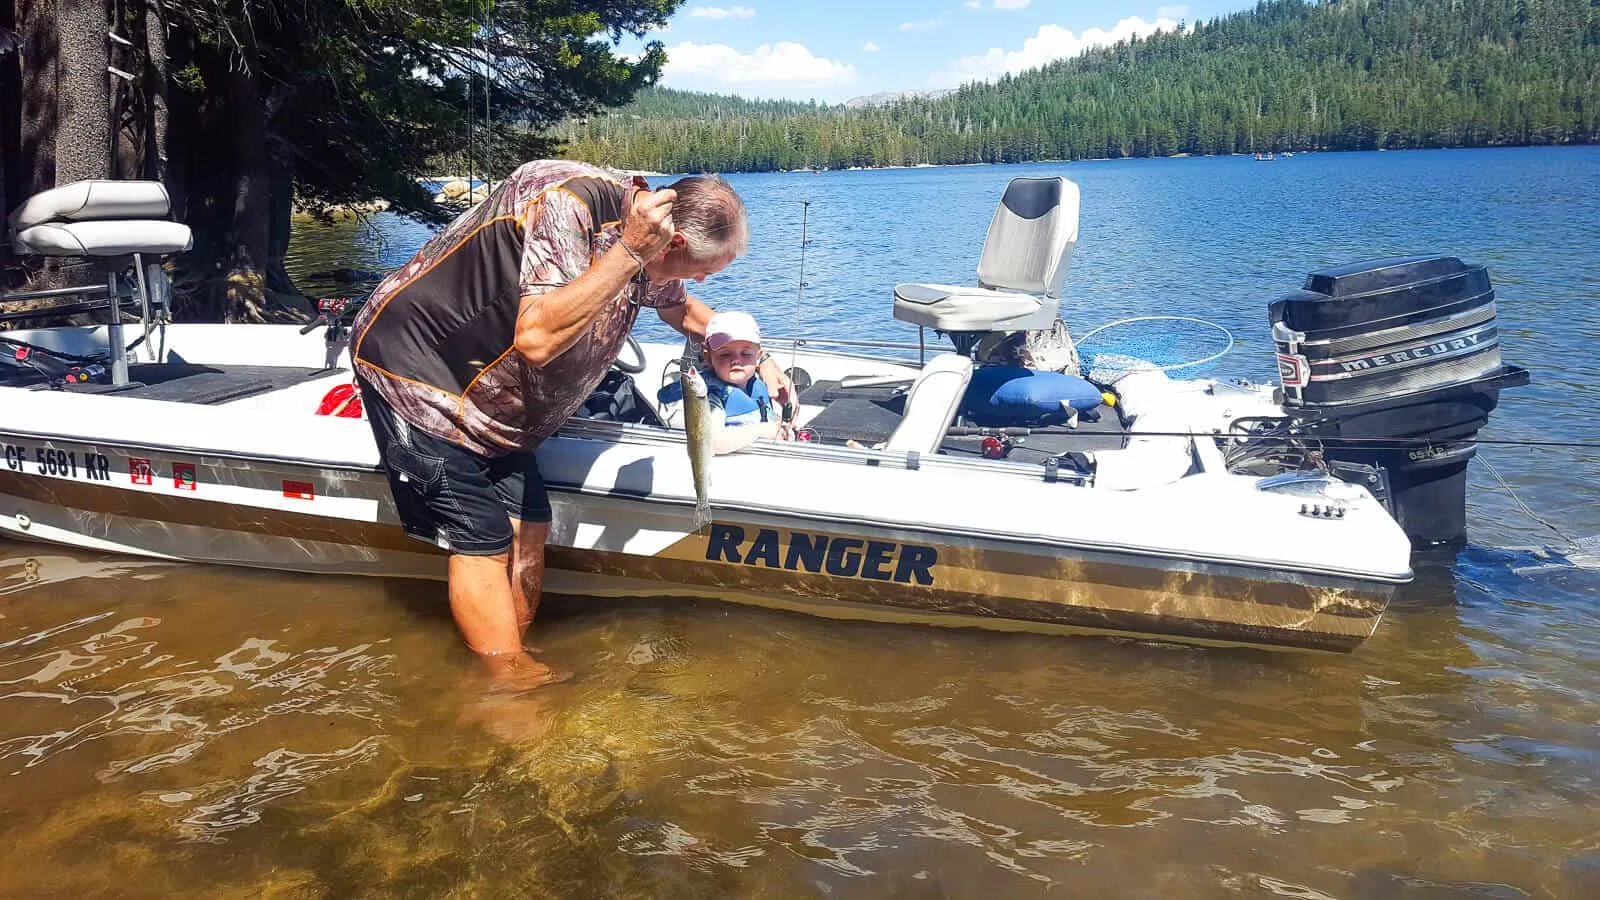 Man holds fish on fishing line next to small boat with toddler girl inside.